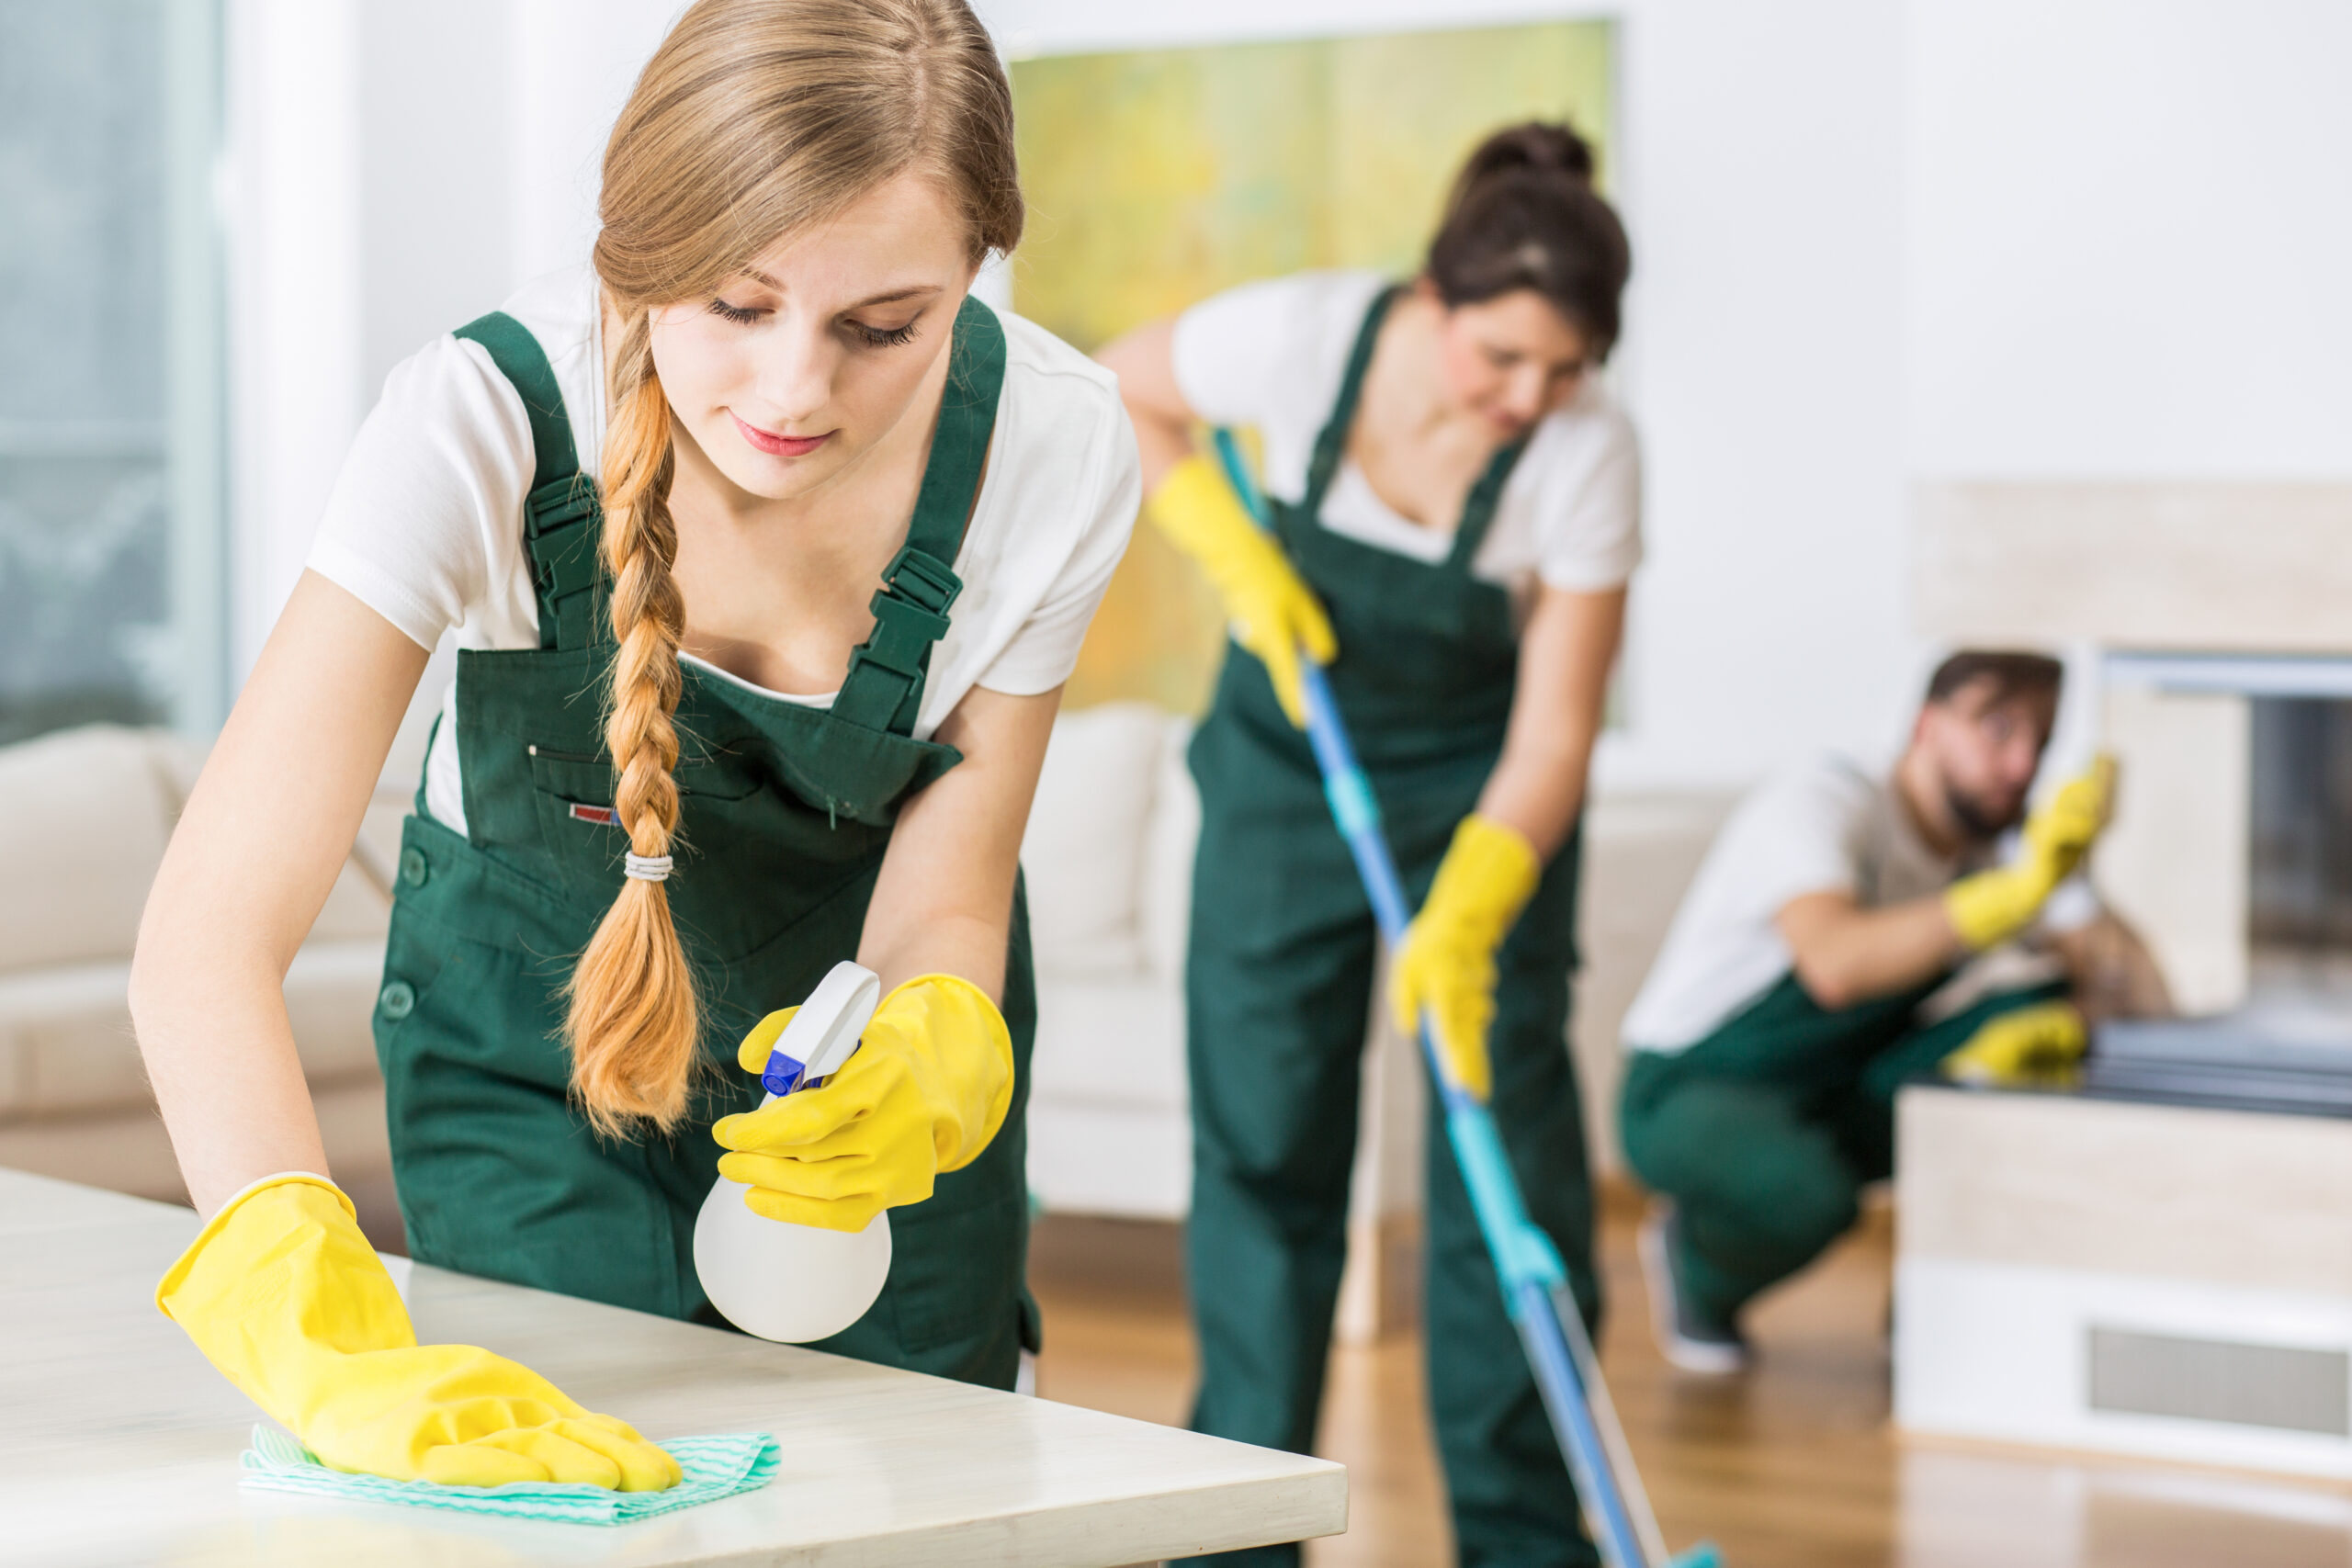 Professional cleaning service in uniforms during work